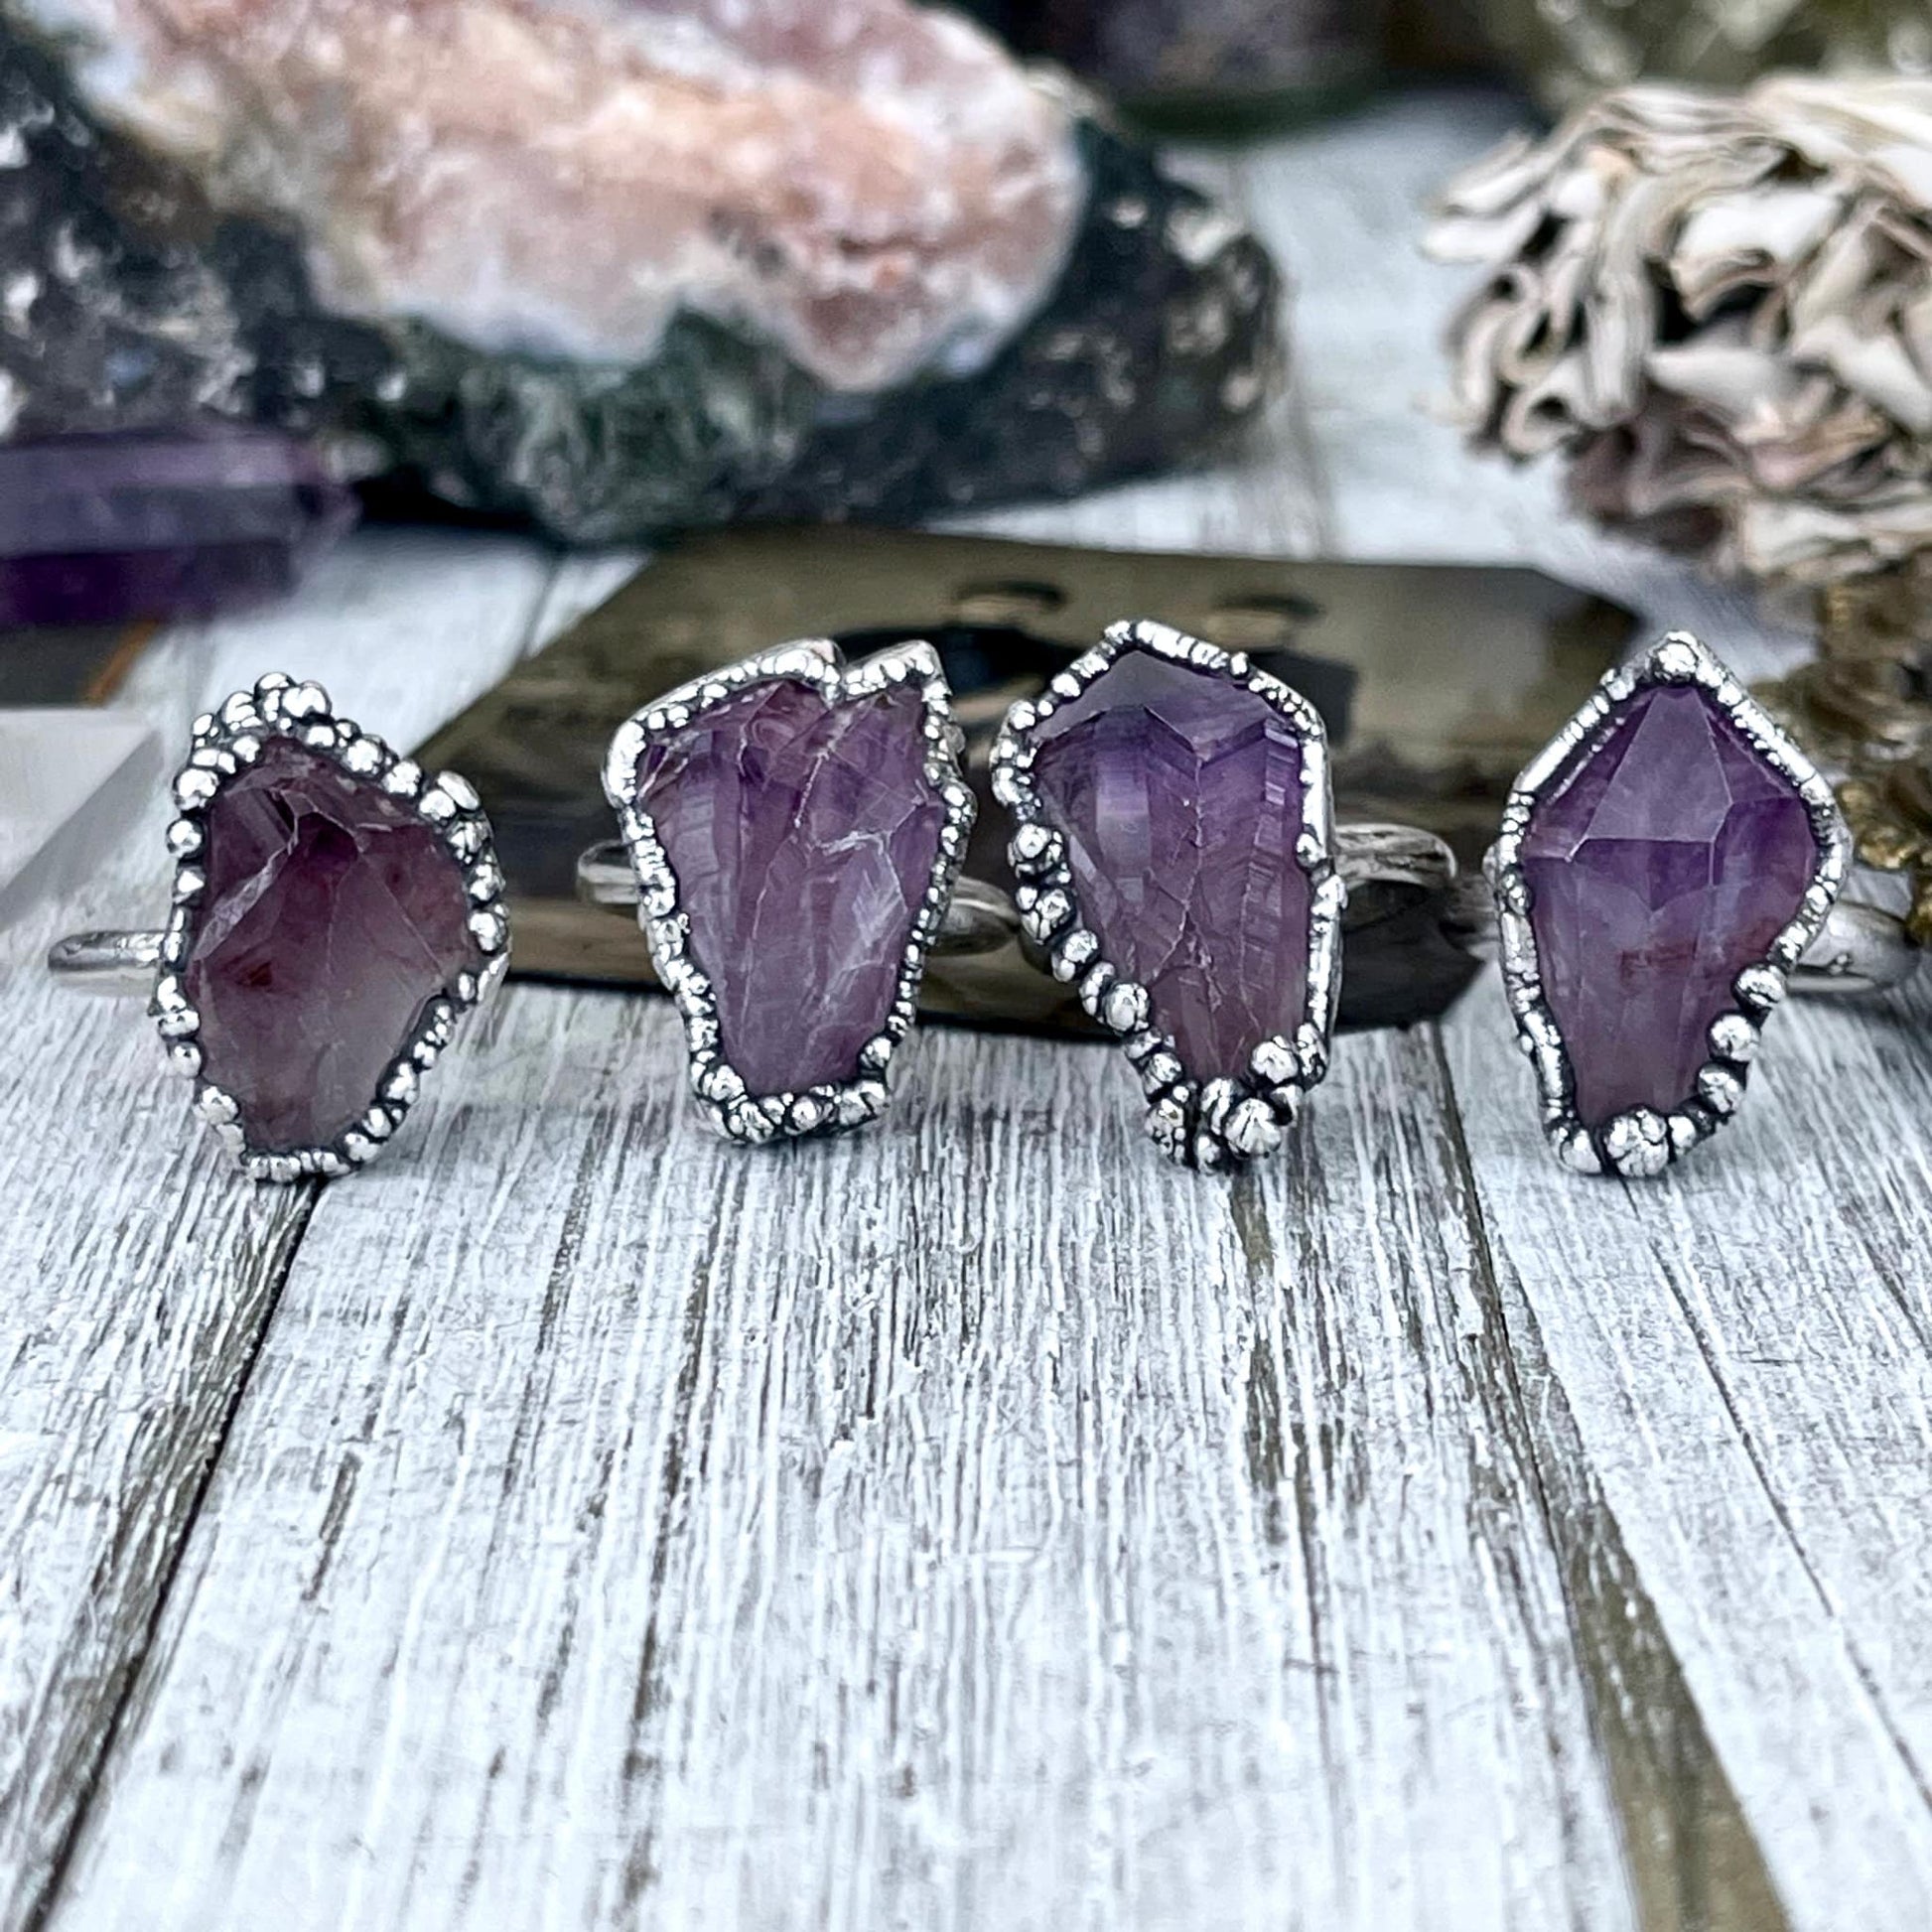 Raw Amethyst Purple Crystal Ring in Fine Silver Size 5 6 7 8 9 / Foxlark Collection - One of a Kind